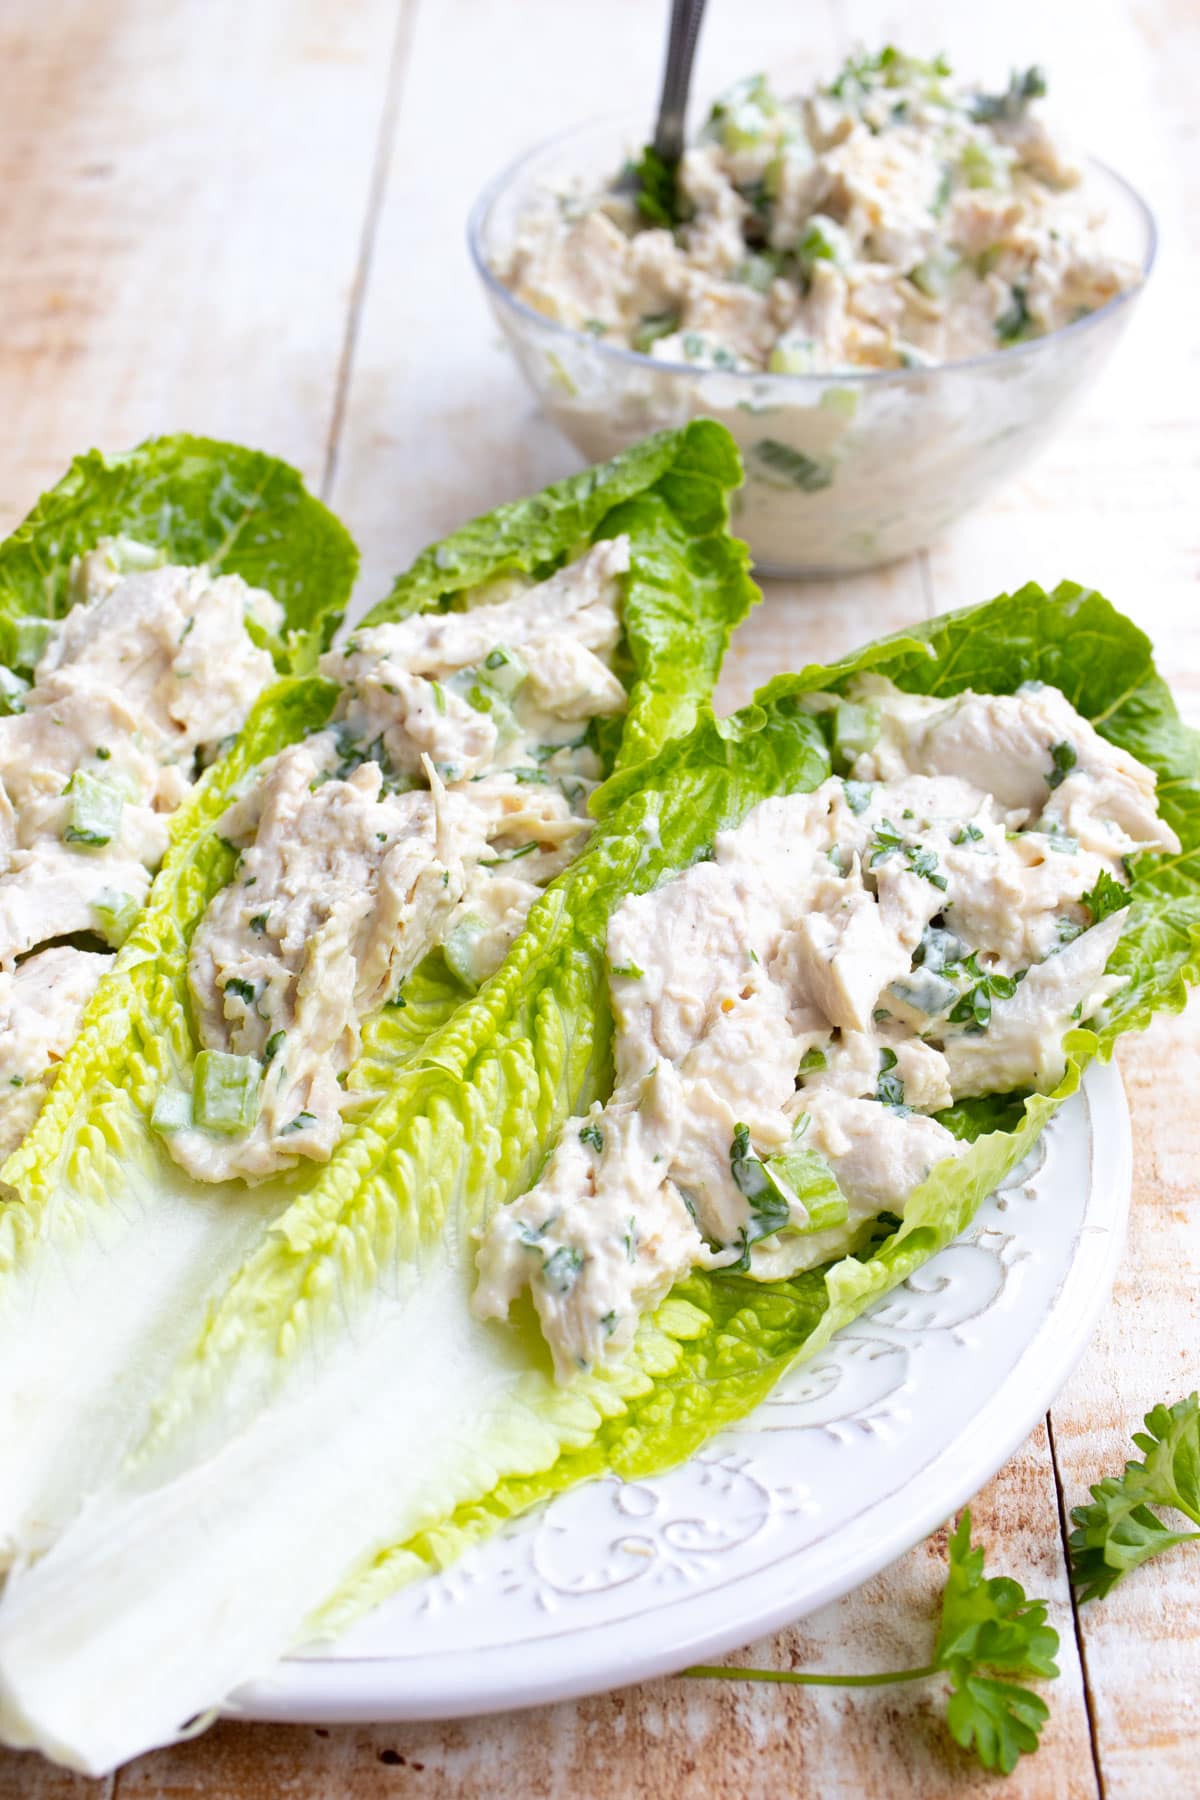 Romaine salad leaves with chicken salad.